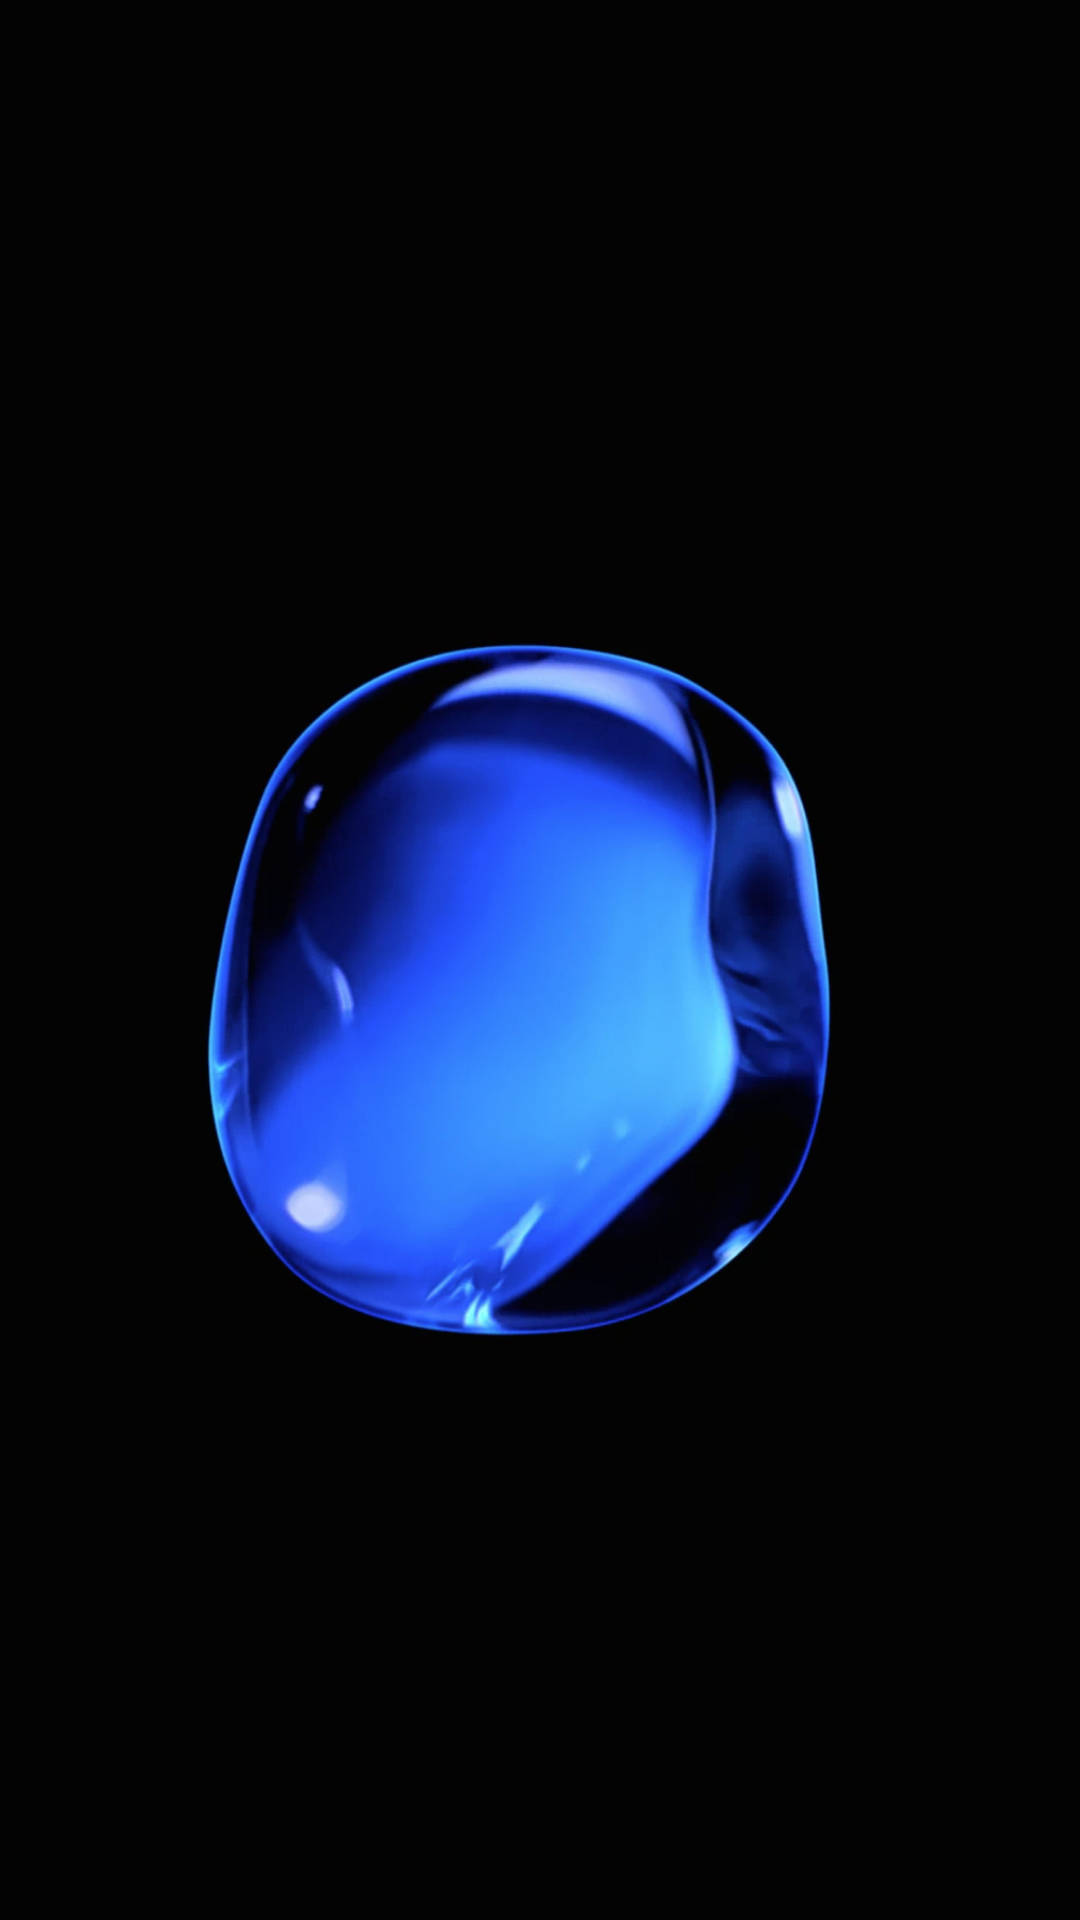 Blue Water Droplet Iphone 8 Live Background